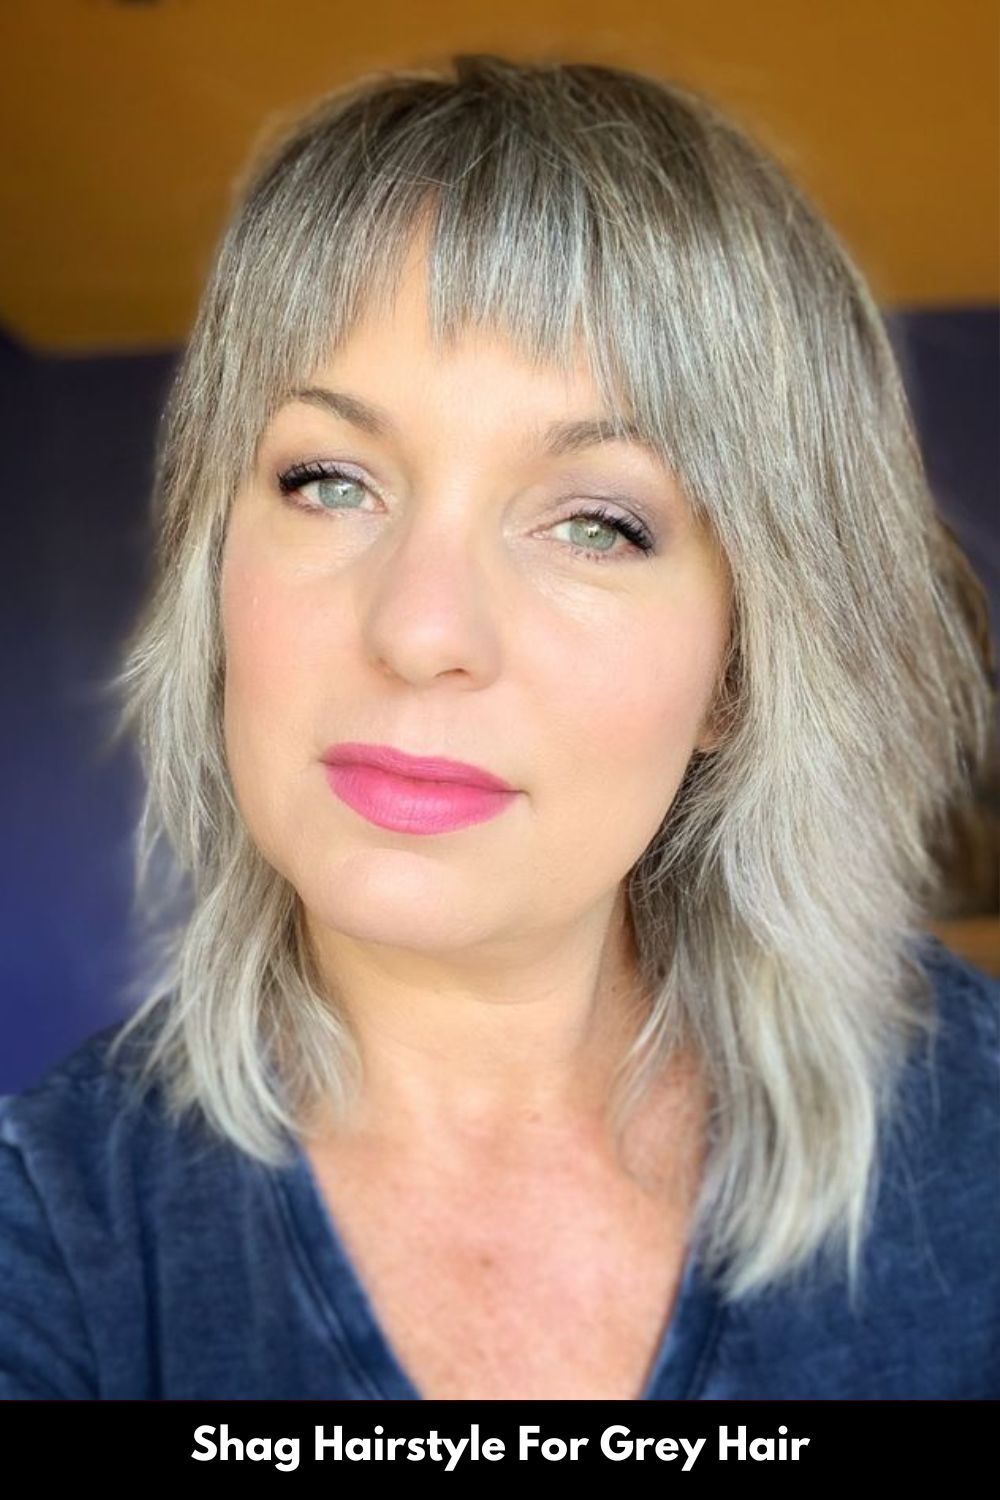 shag-hairstyle-for-grey-hair-for-women-over-60